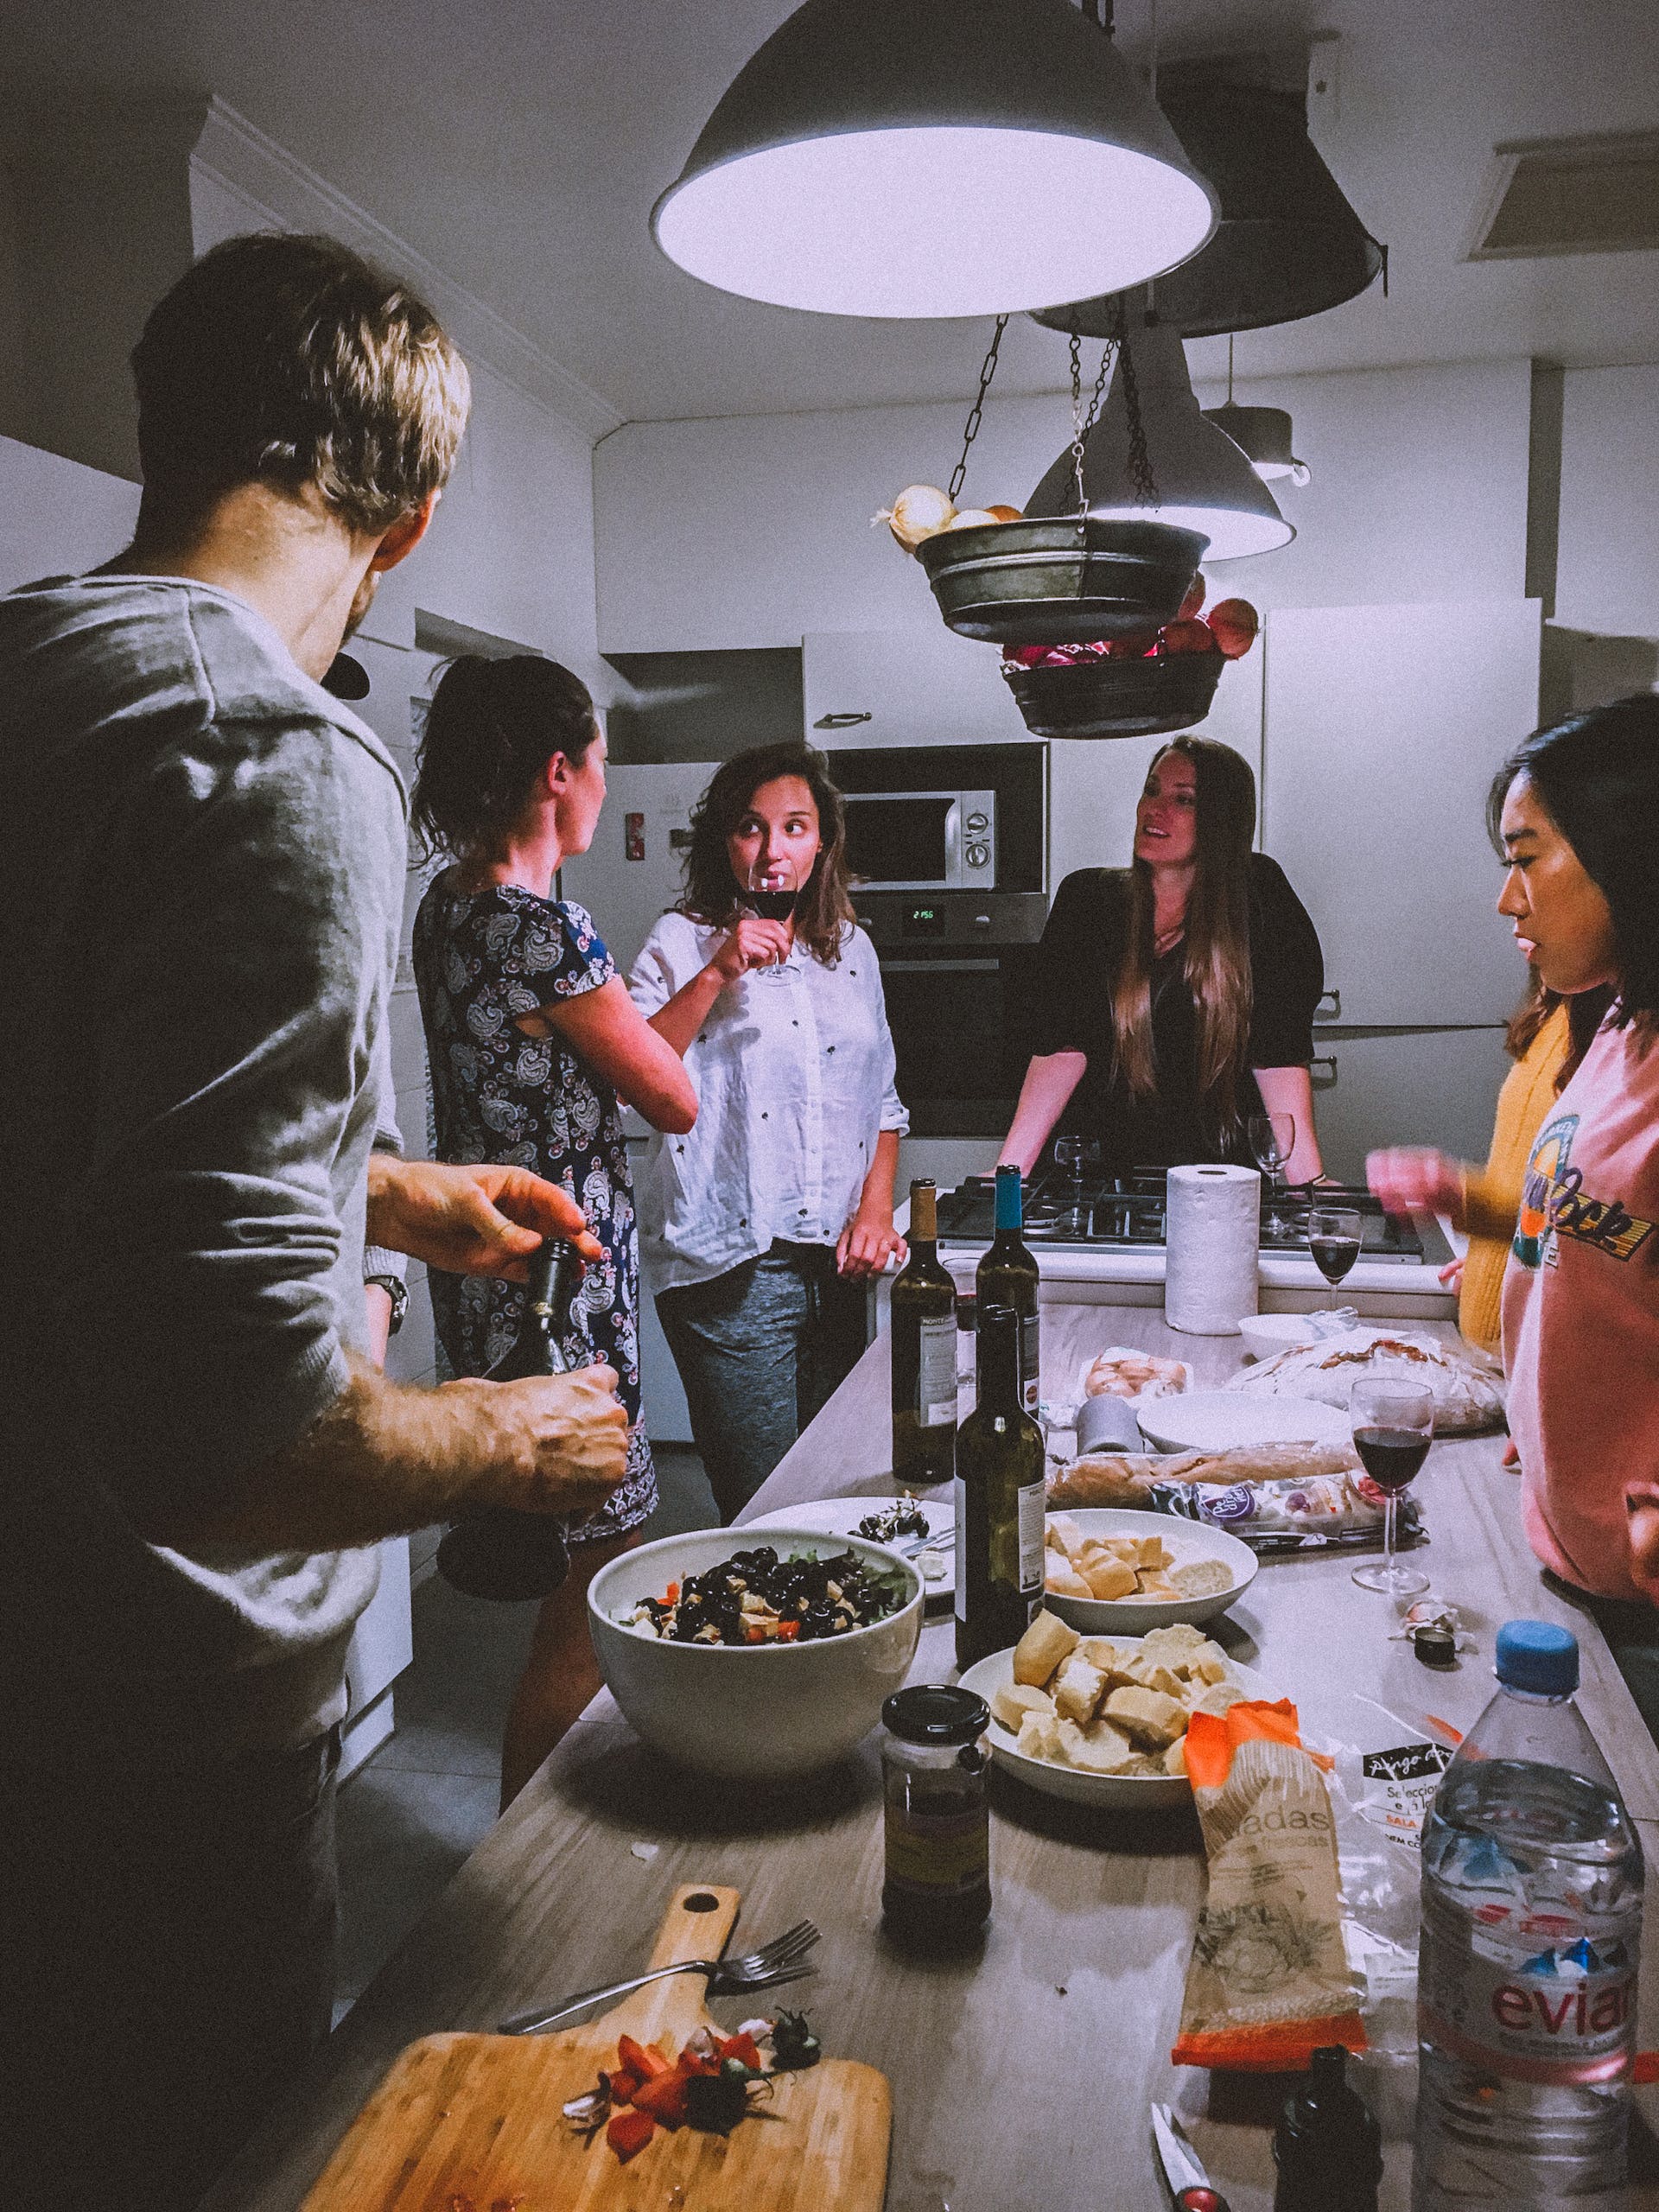 People in the kitchen together | Source: Pexels